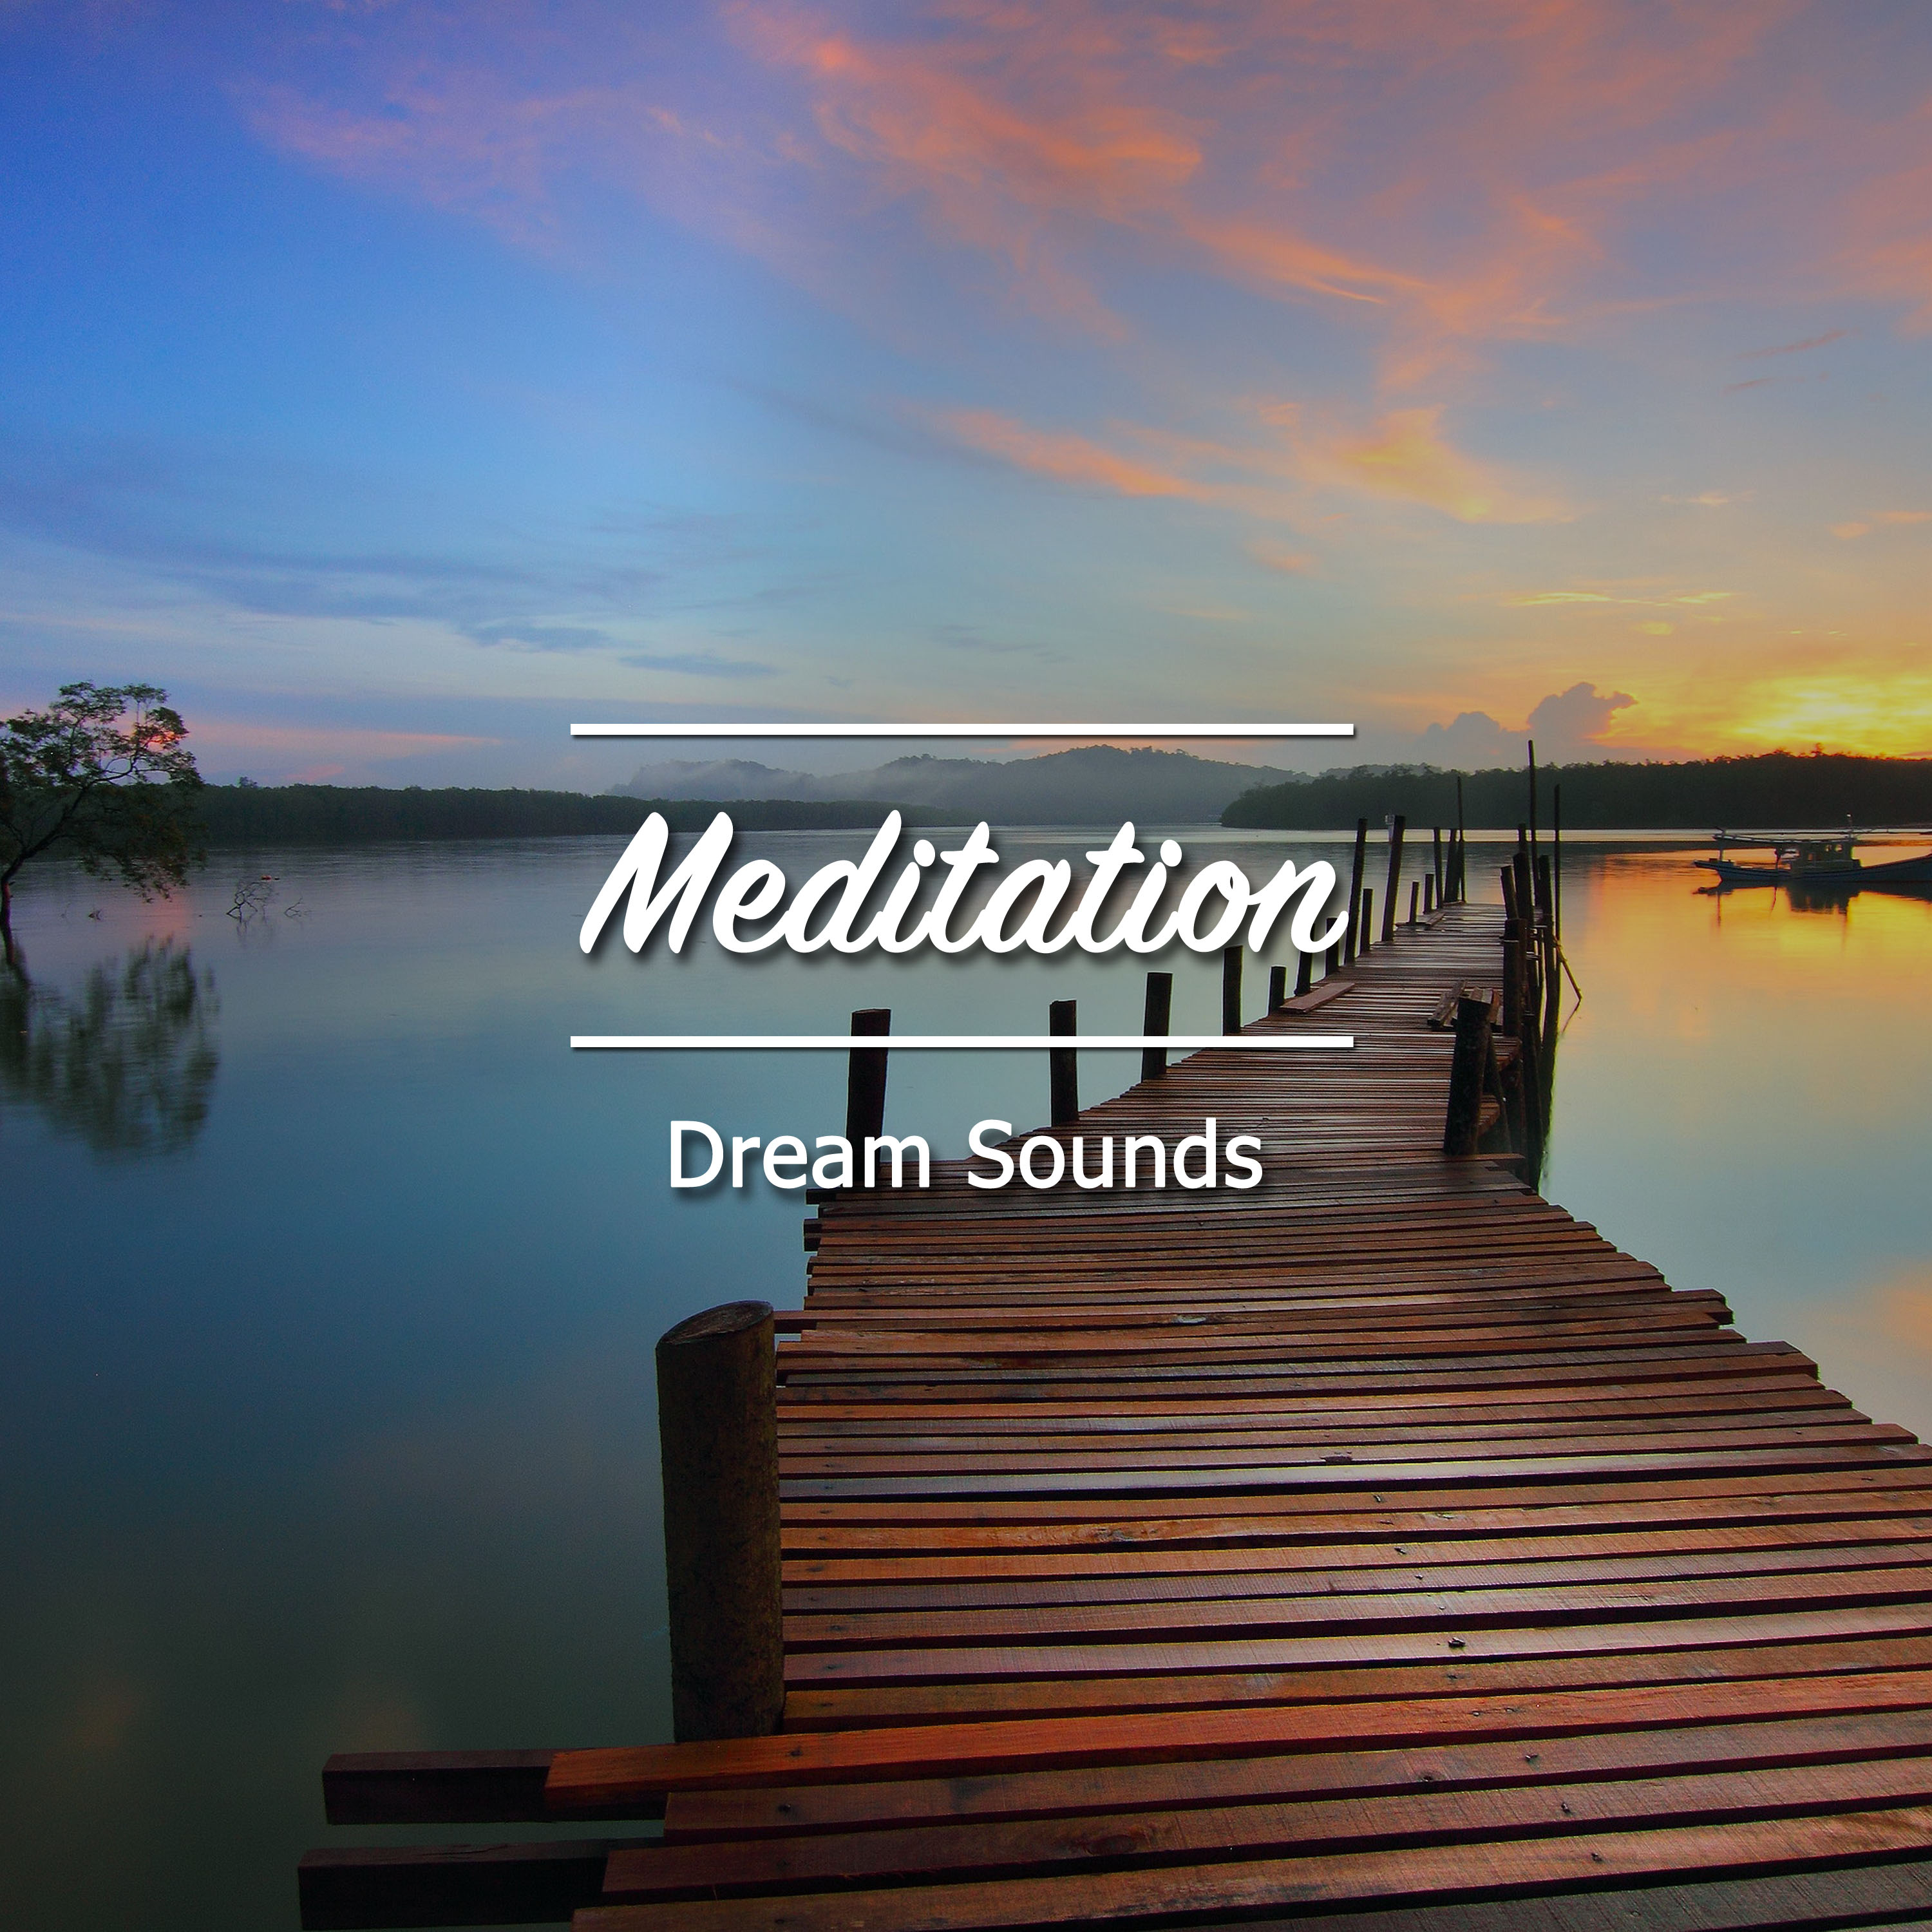 11 Meditation and Stress Relief Dream Sounds